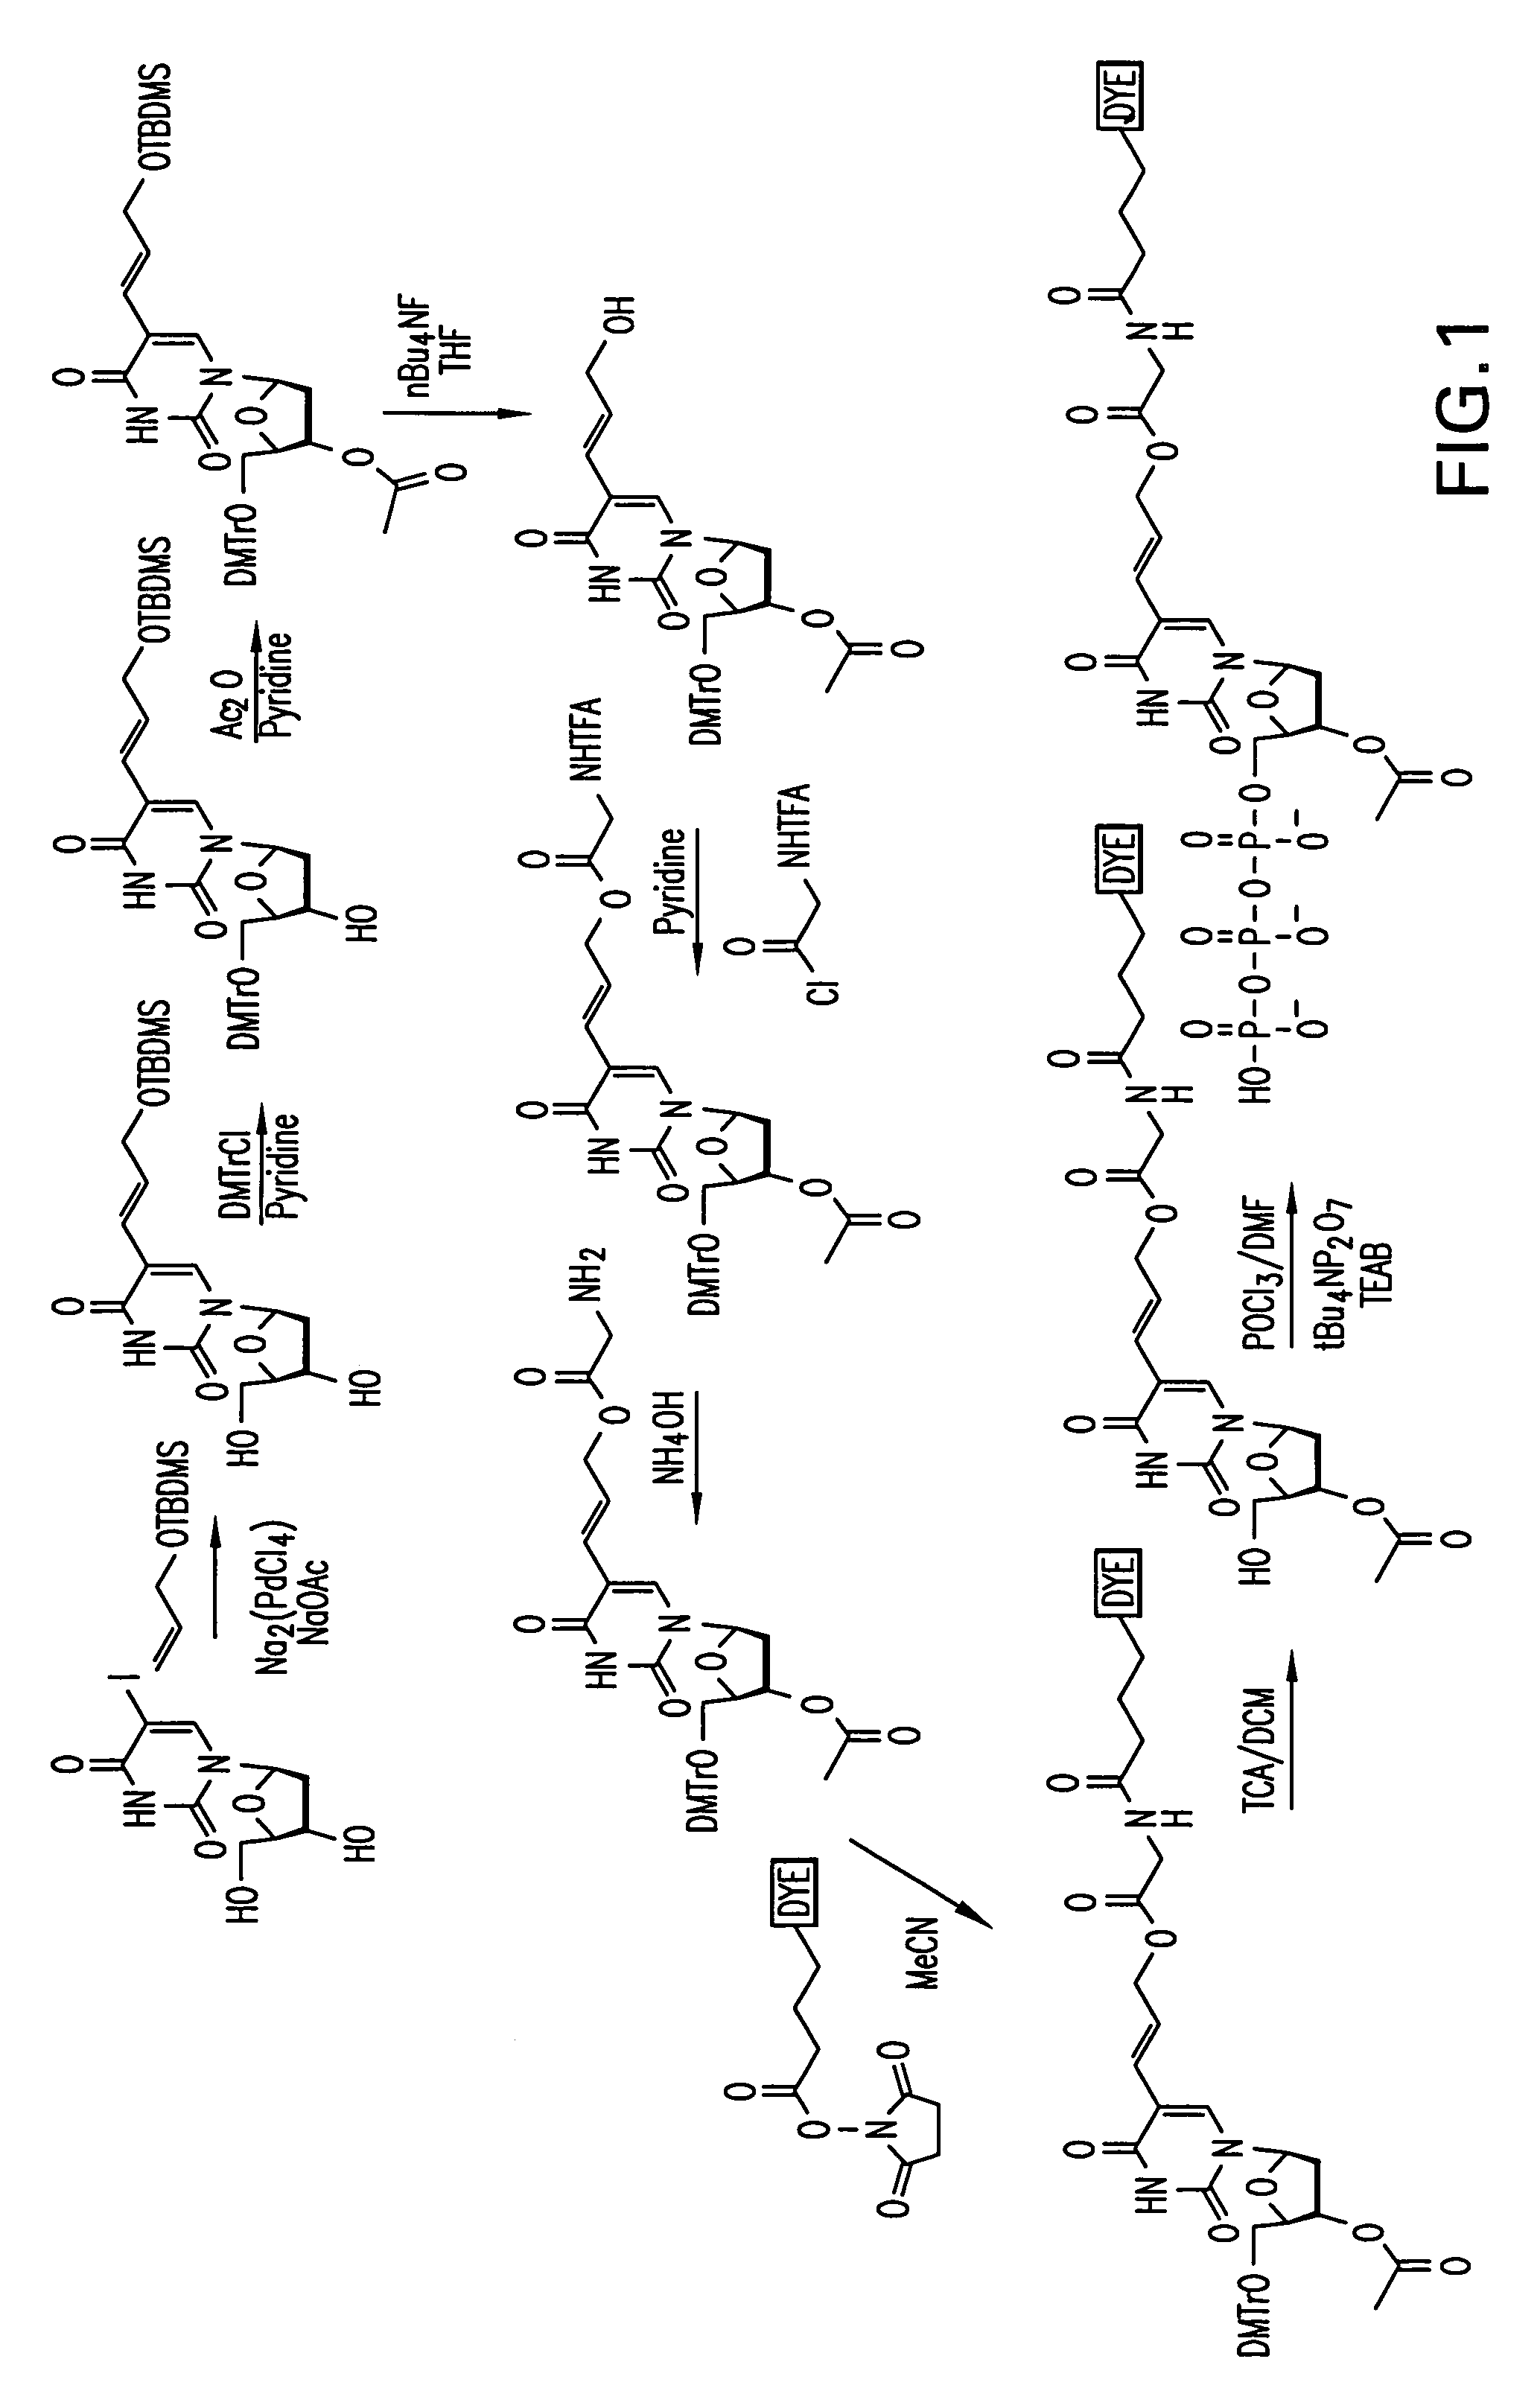 Nucleotide analogues comprising a reporter moiety and a polymerase enzyme blocking moiety